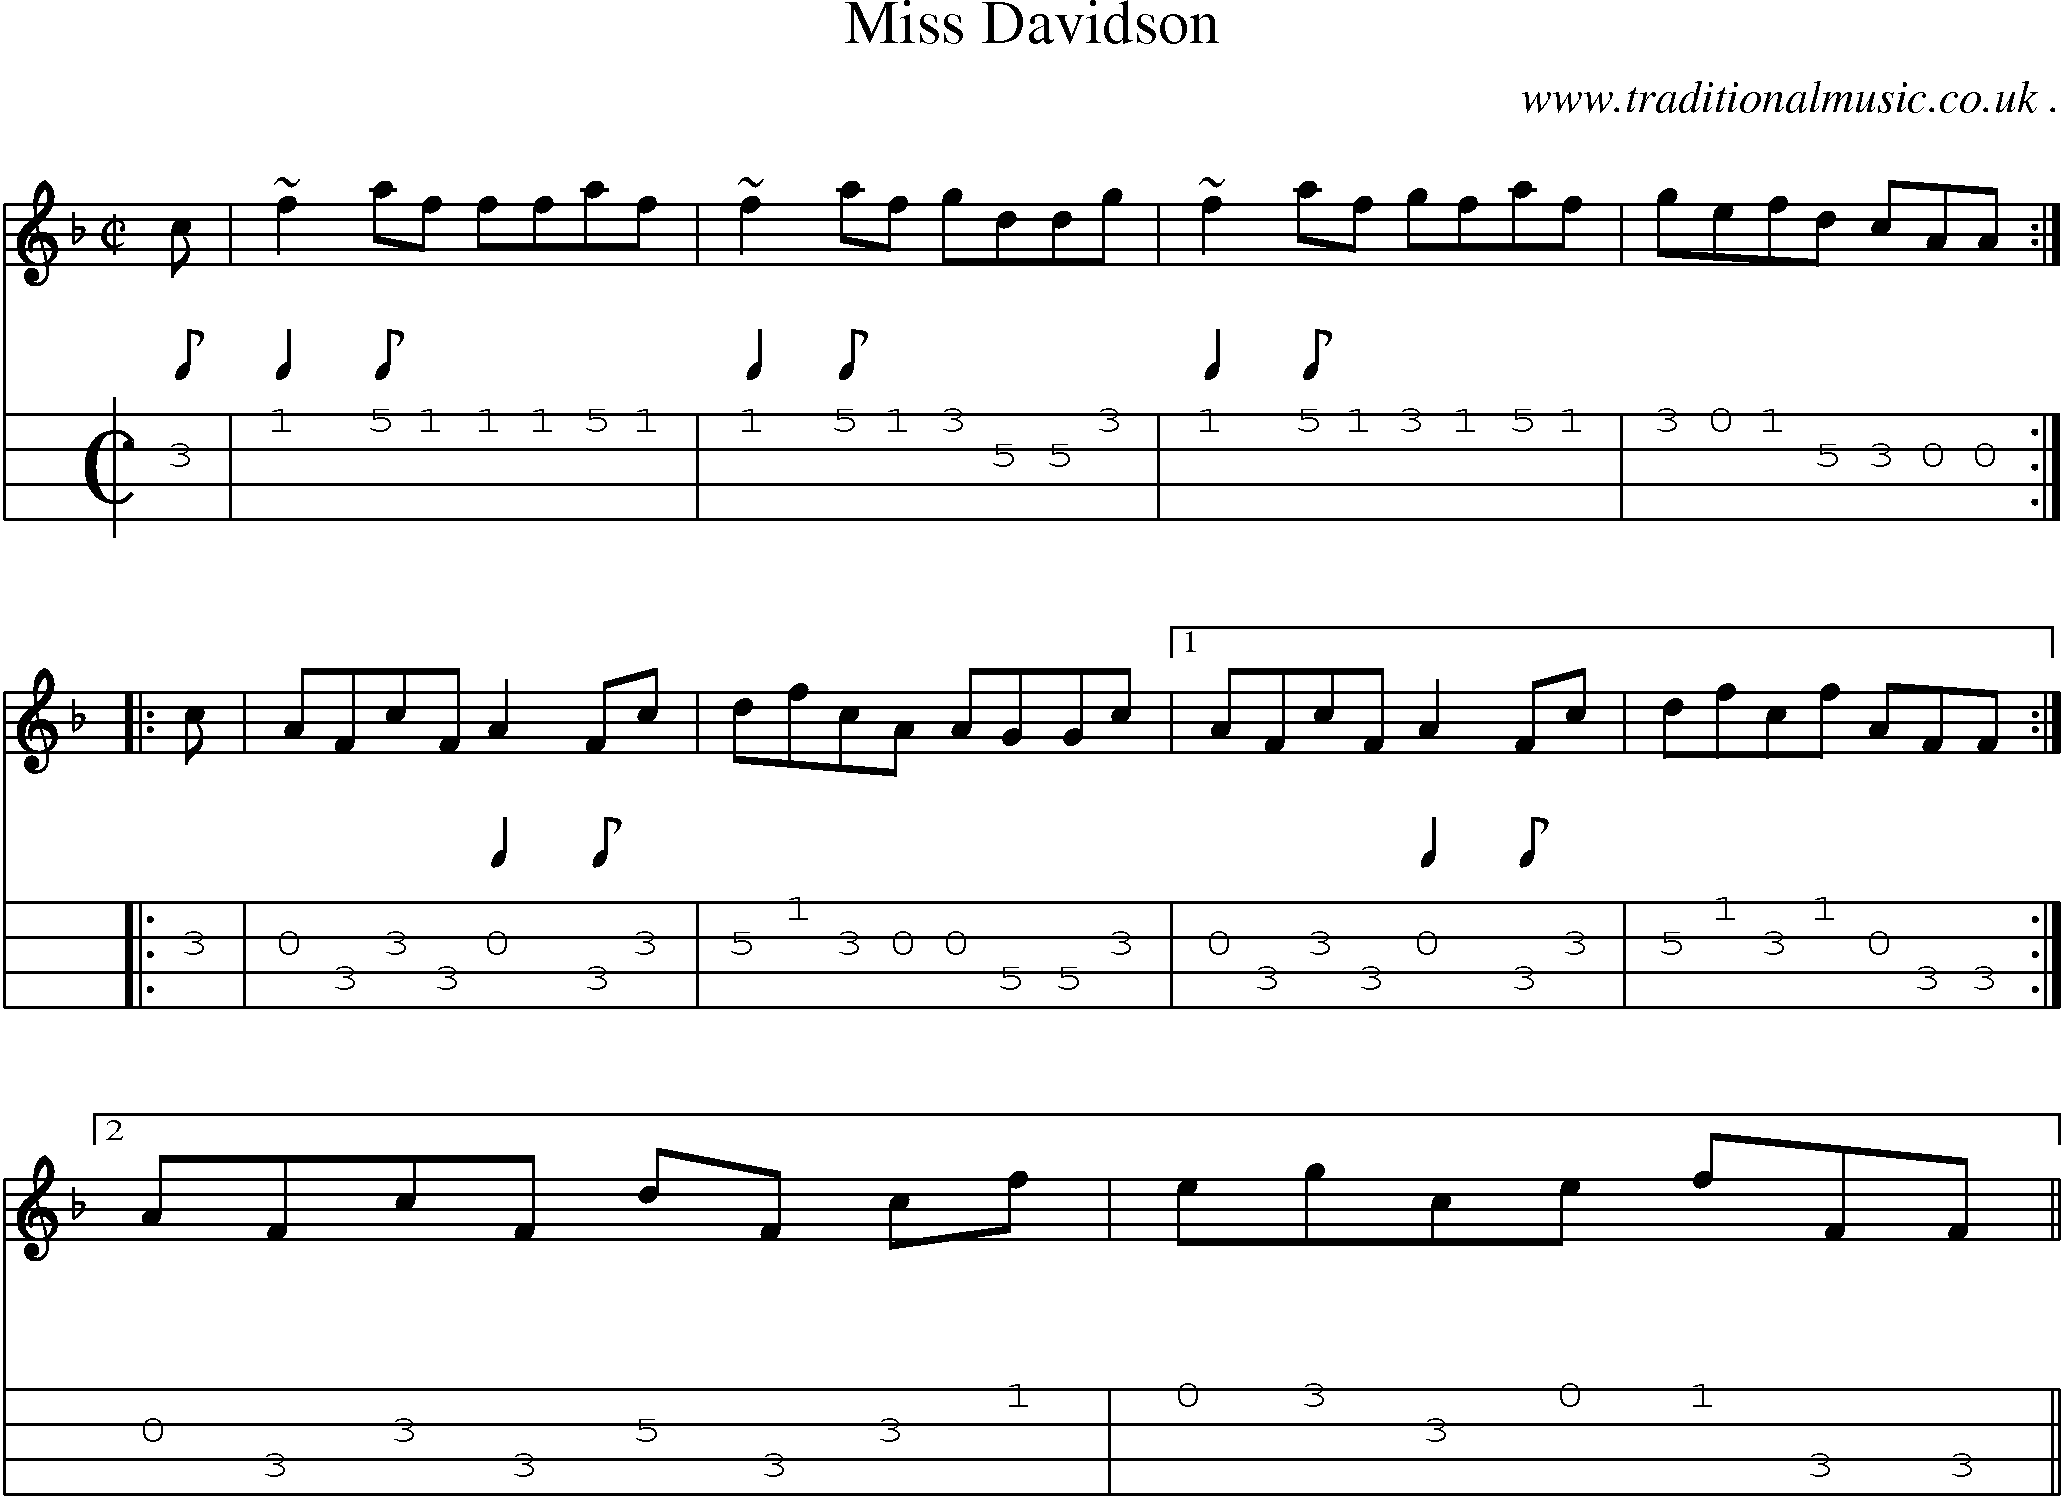 Sheet-music  score, Chords and Mandolin Tabs for Miss Davidson